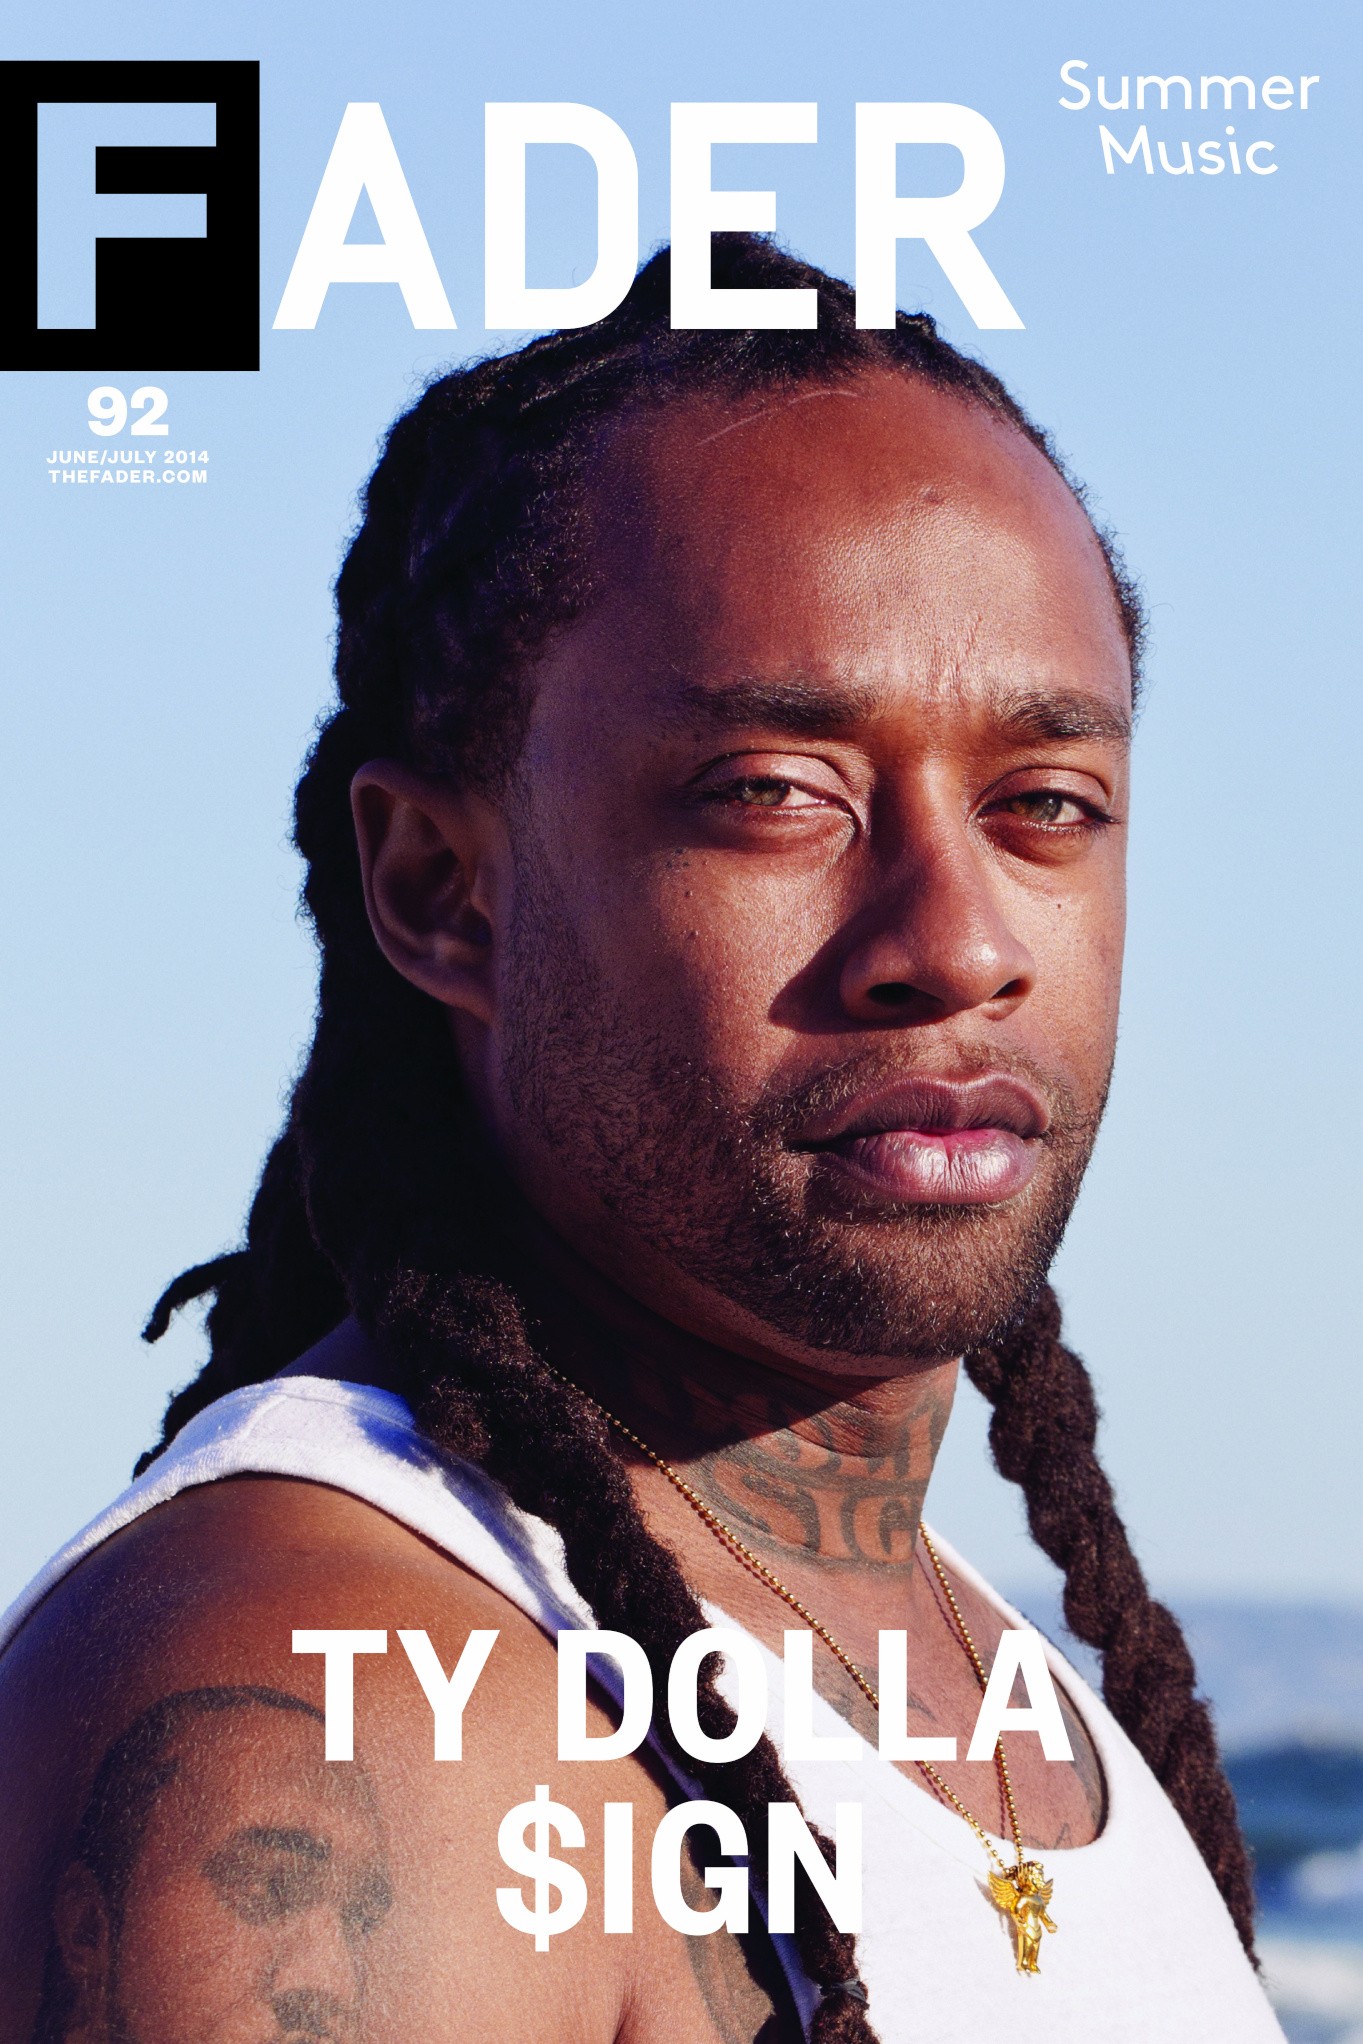 Ty Dolla $ign on learning from Kanye, his love of house music, and getting nervous around Stevie Wonder